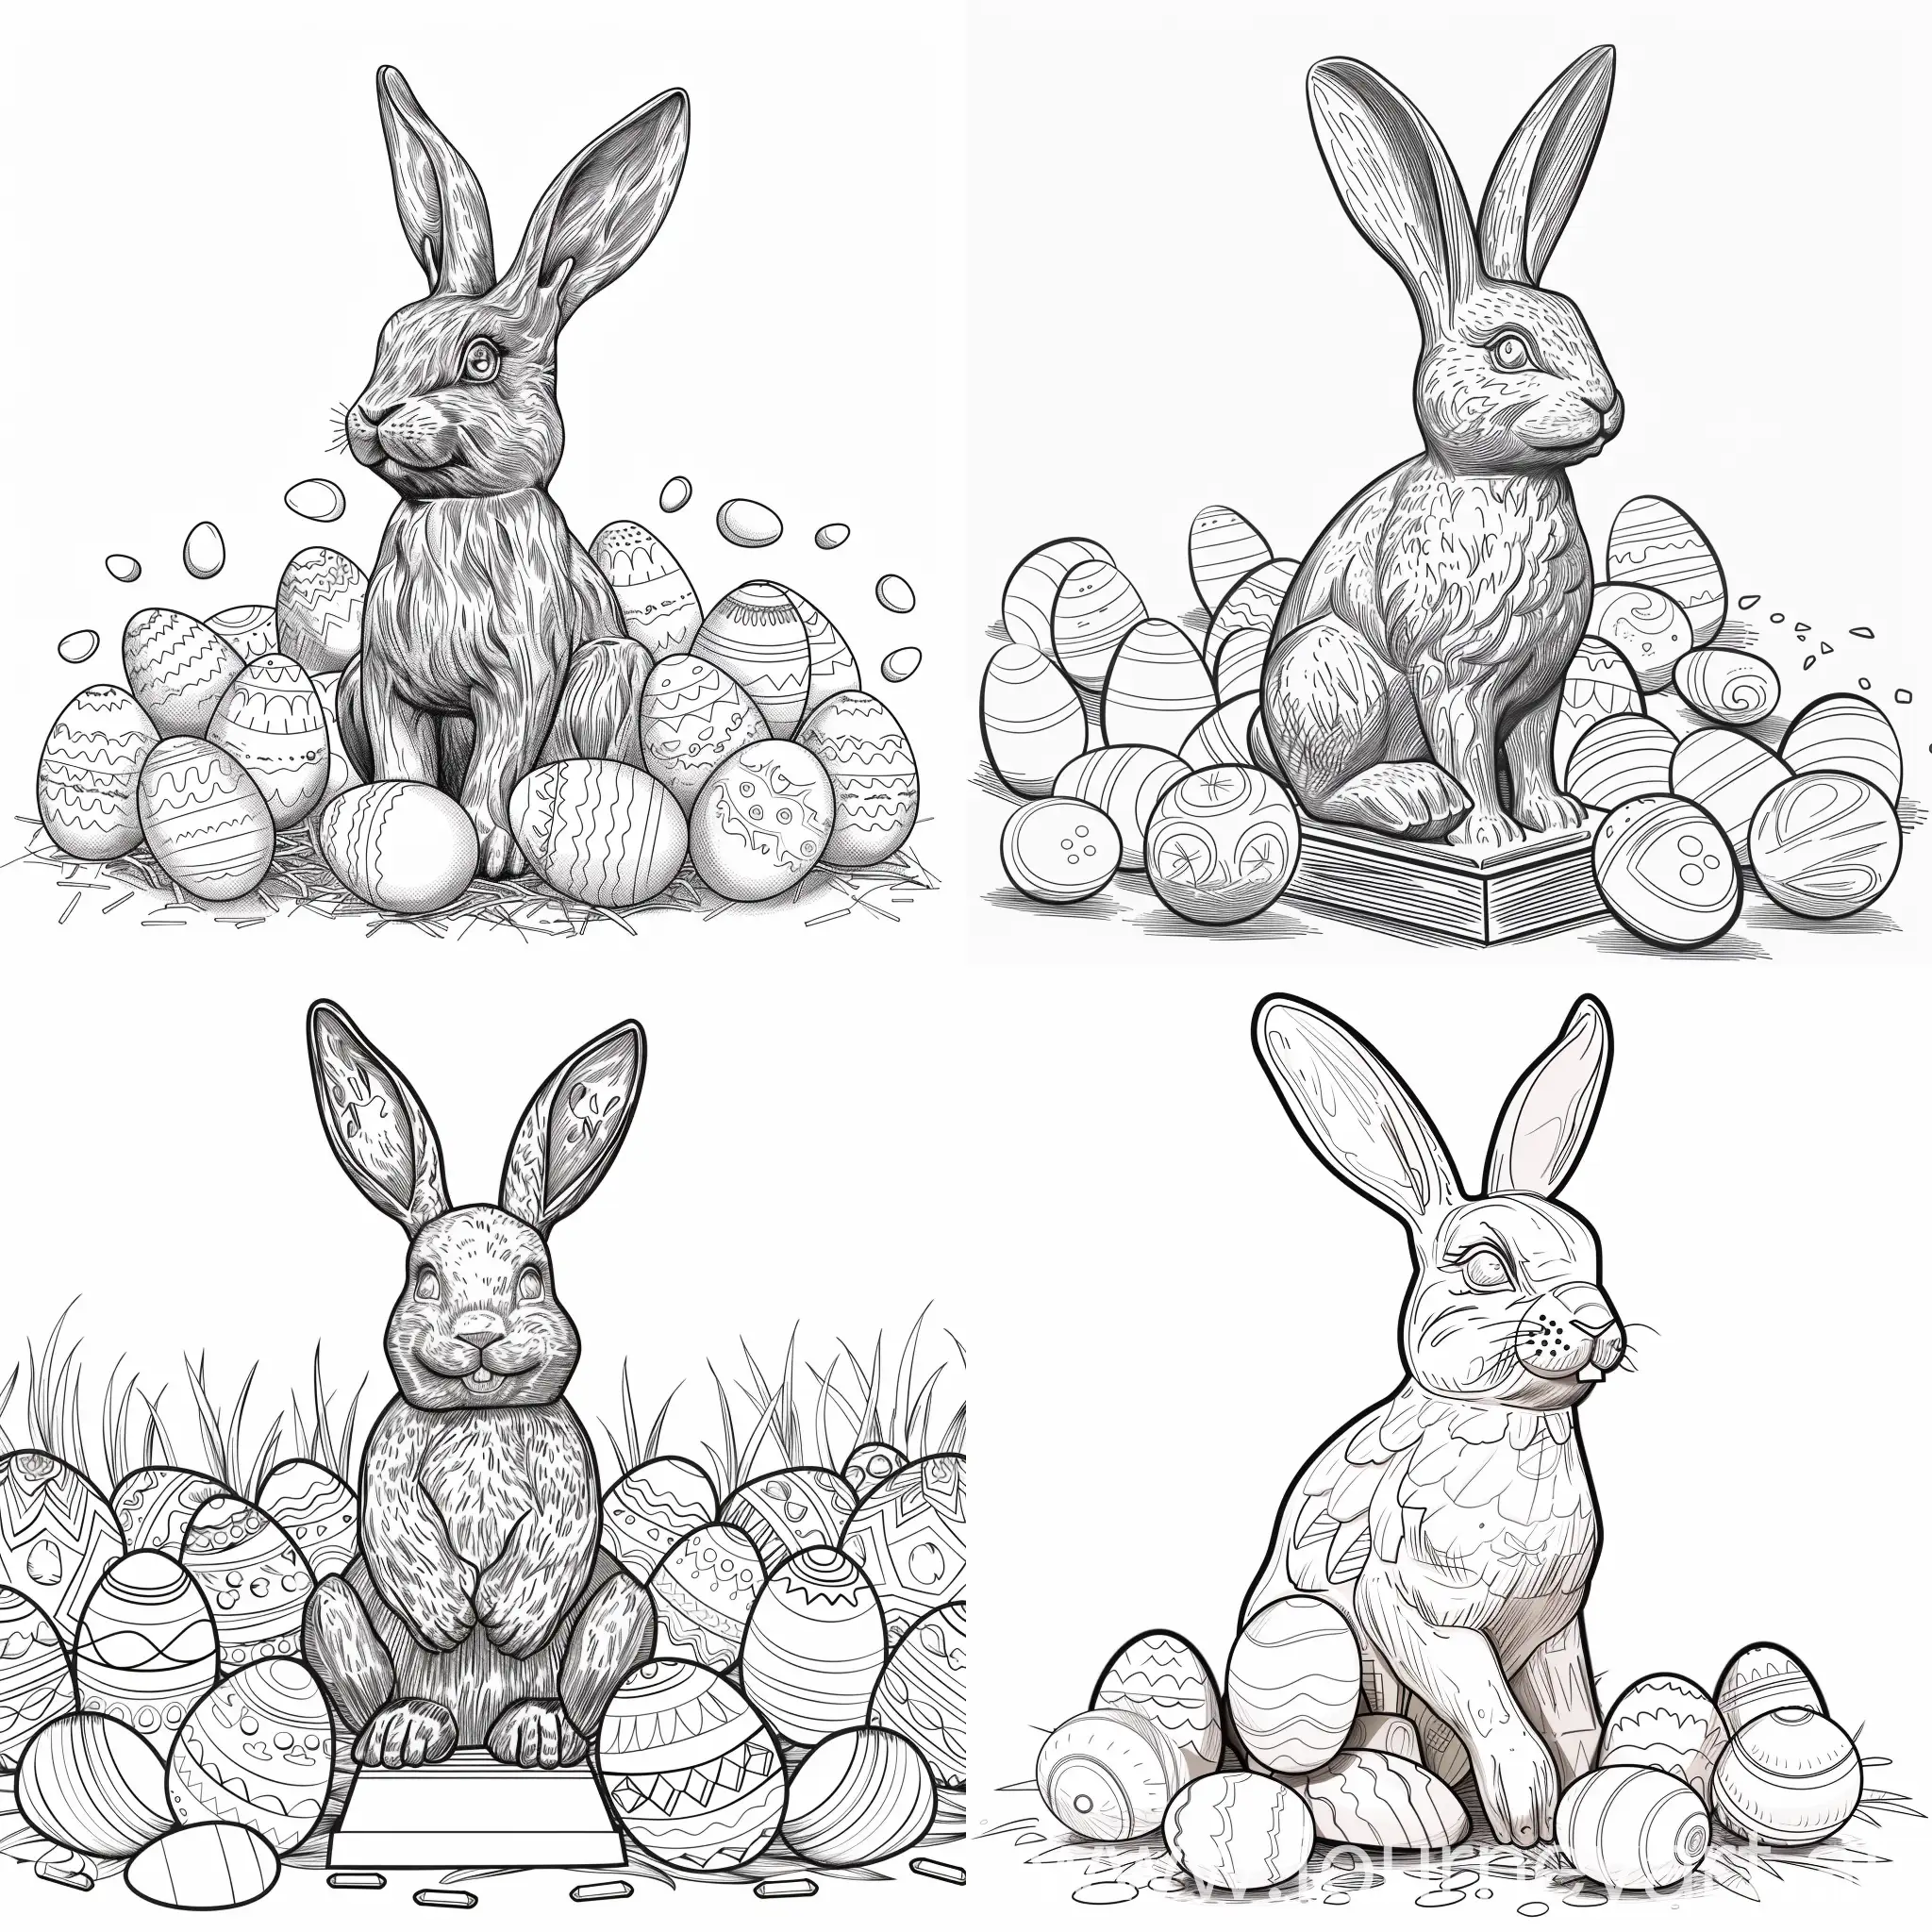 Chocolate-Easter-Bunny-Statue-with-Surrounding-Easter-Eggs-for-Coloring-Book